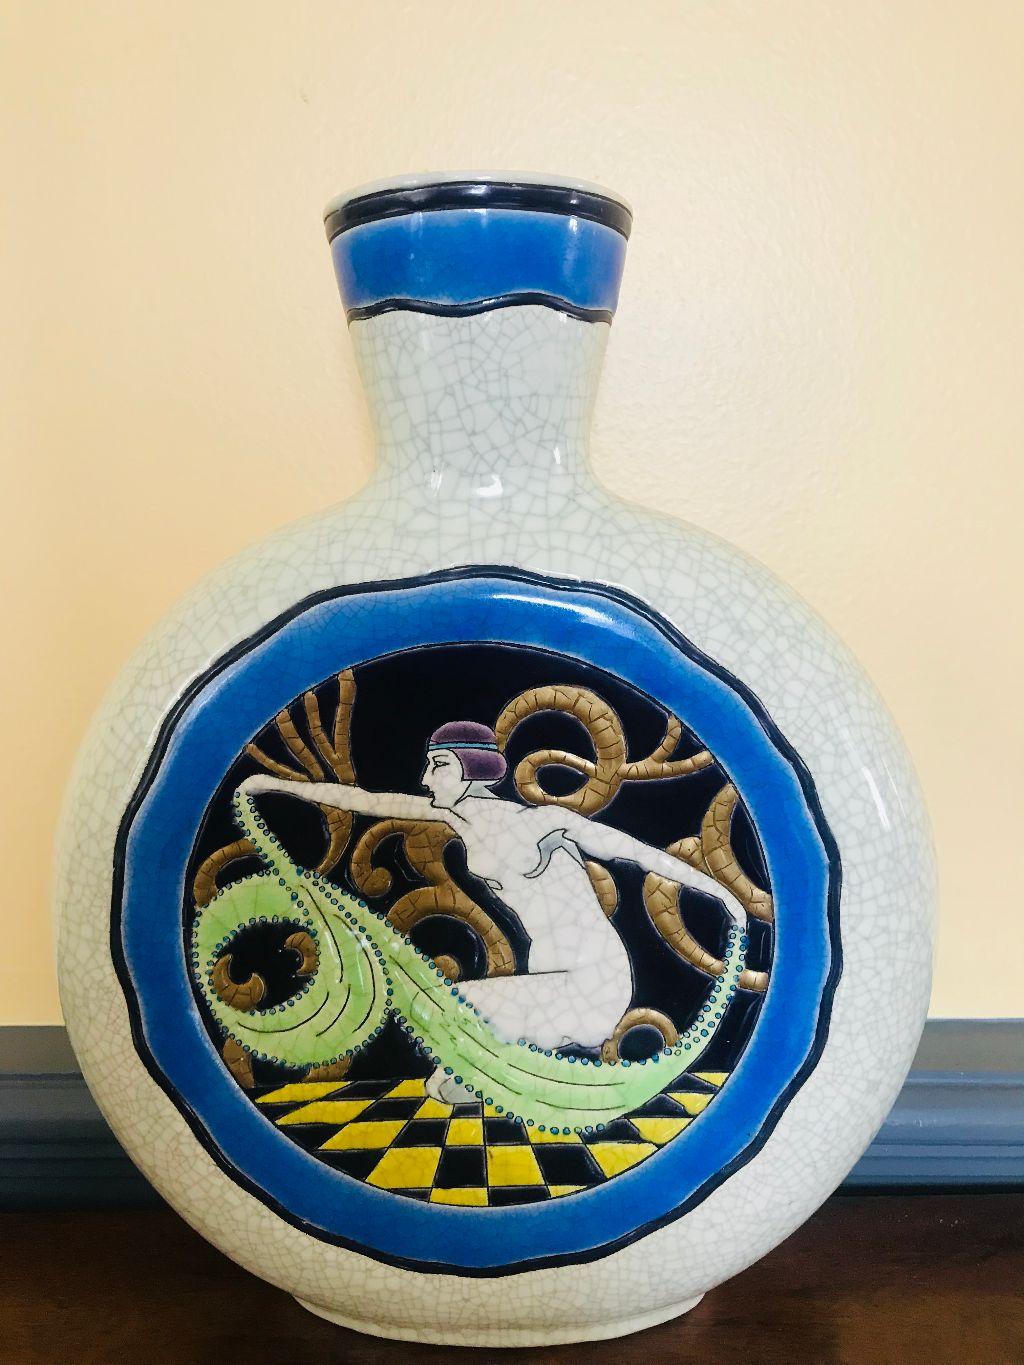 Rare and beautiful longwy Art Deco vase made in France in the 1920s. White craqueling glazed background with bright colorful image of nude female in flapper fashion. Vase is in excellent condition without cracks, chips or repairs. There is a glaze